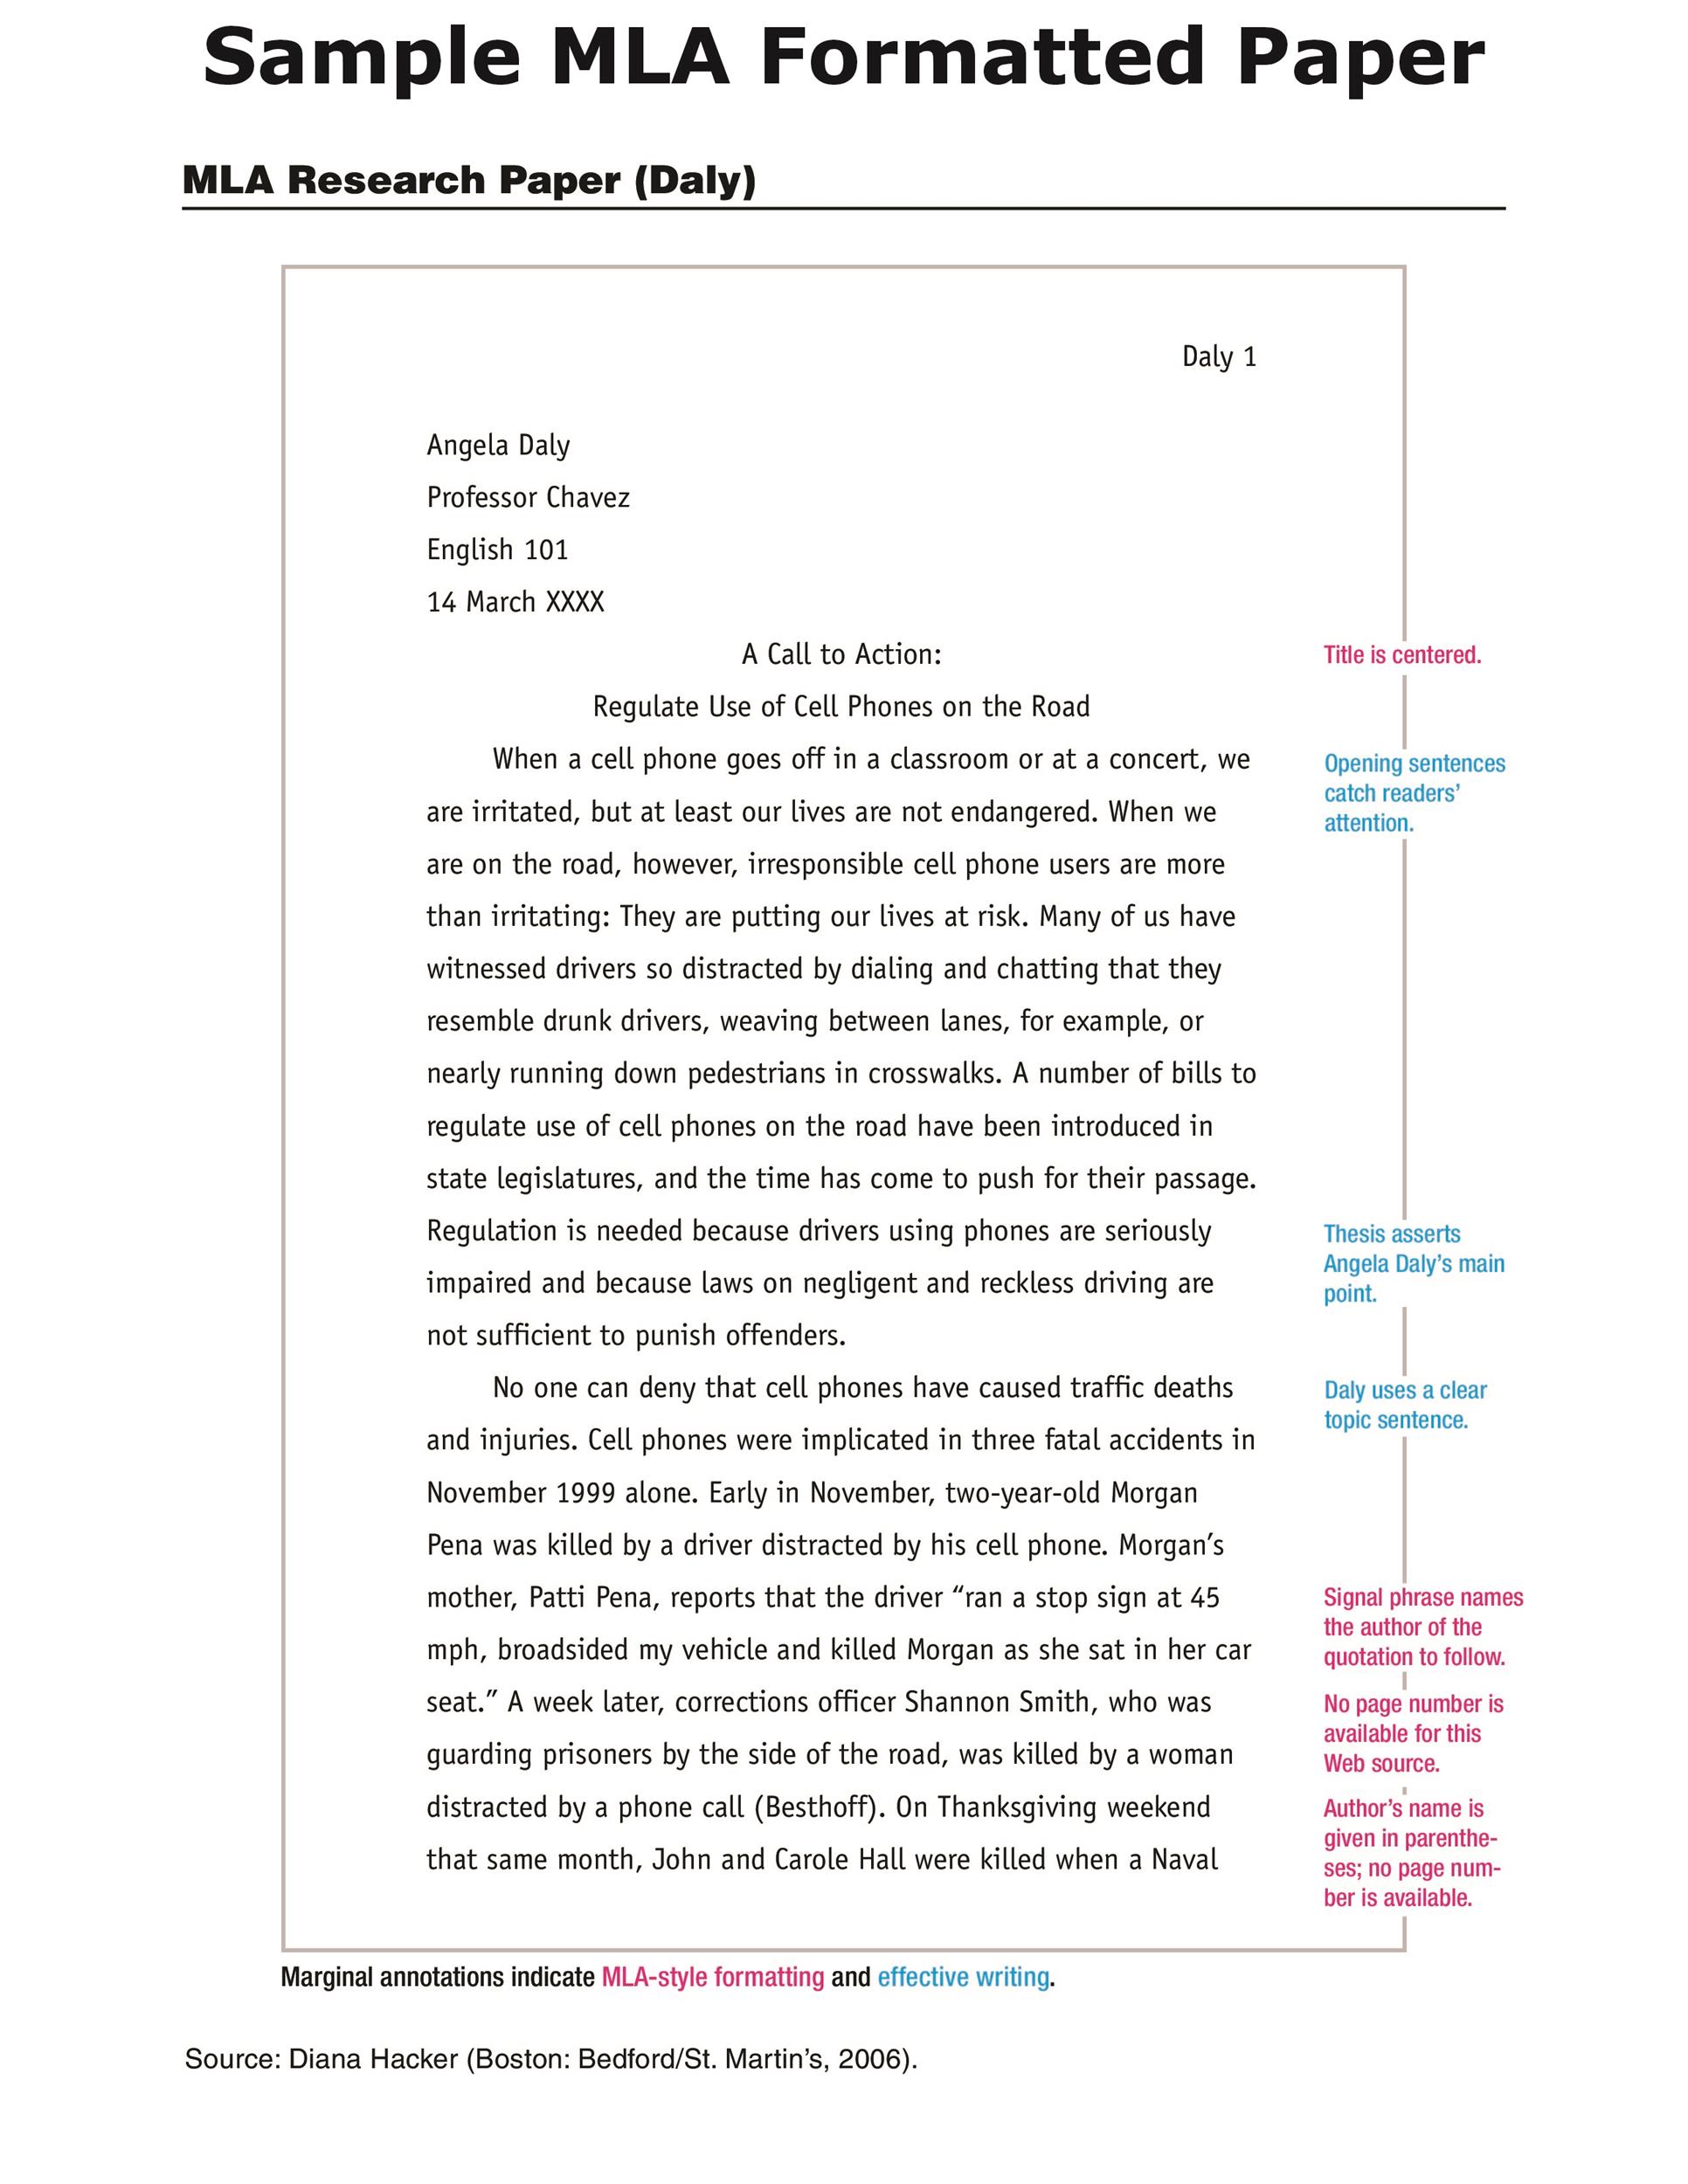 MLA Format for Academic Papers | Free Template (Word & Docs)